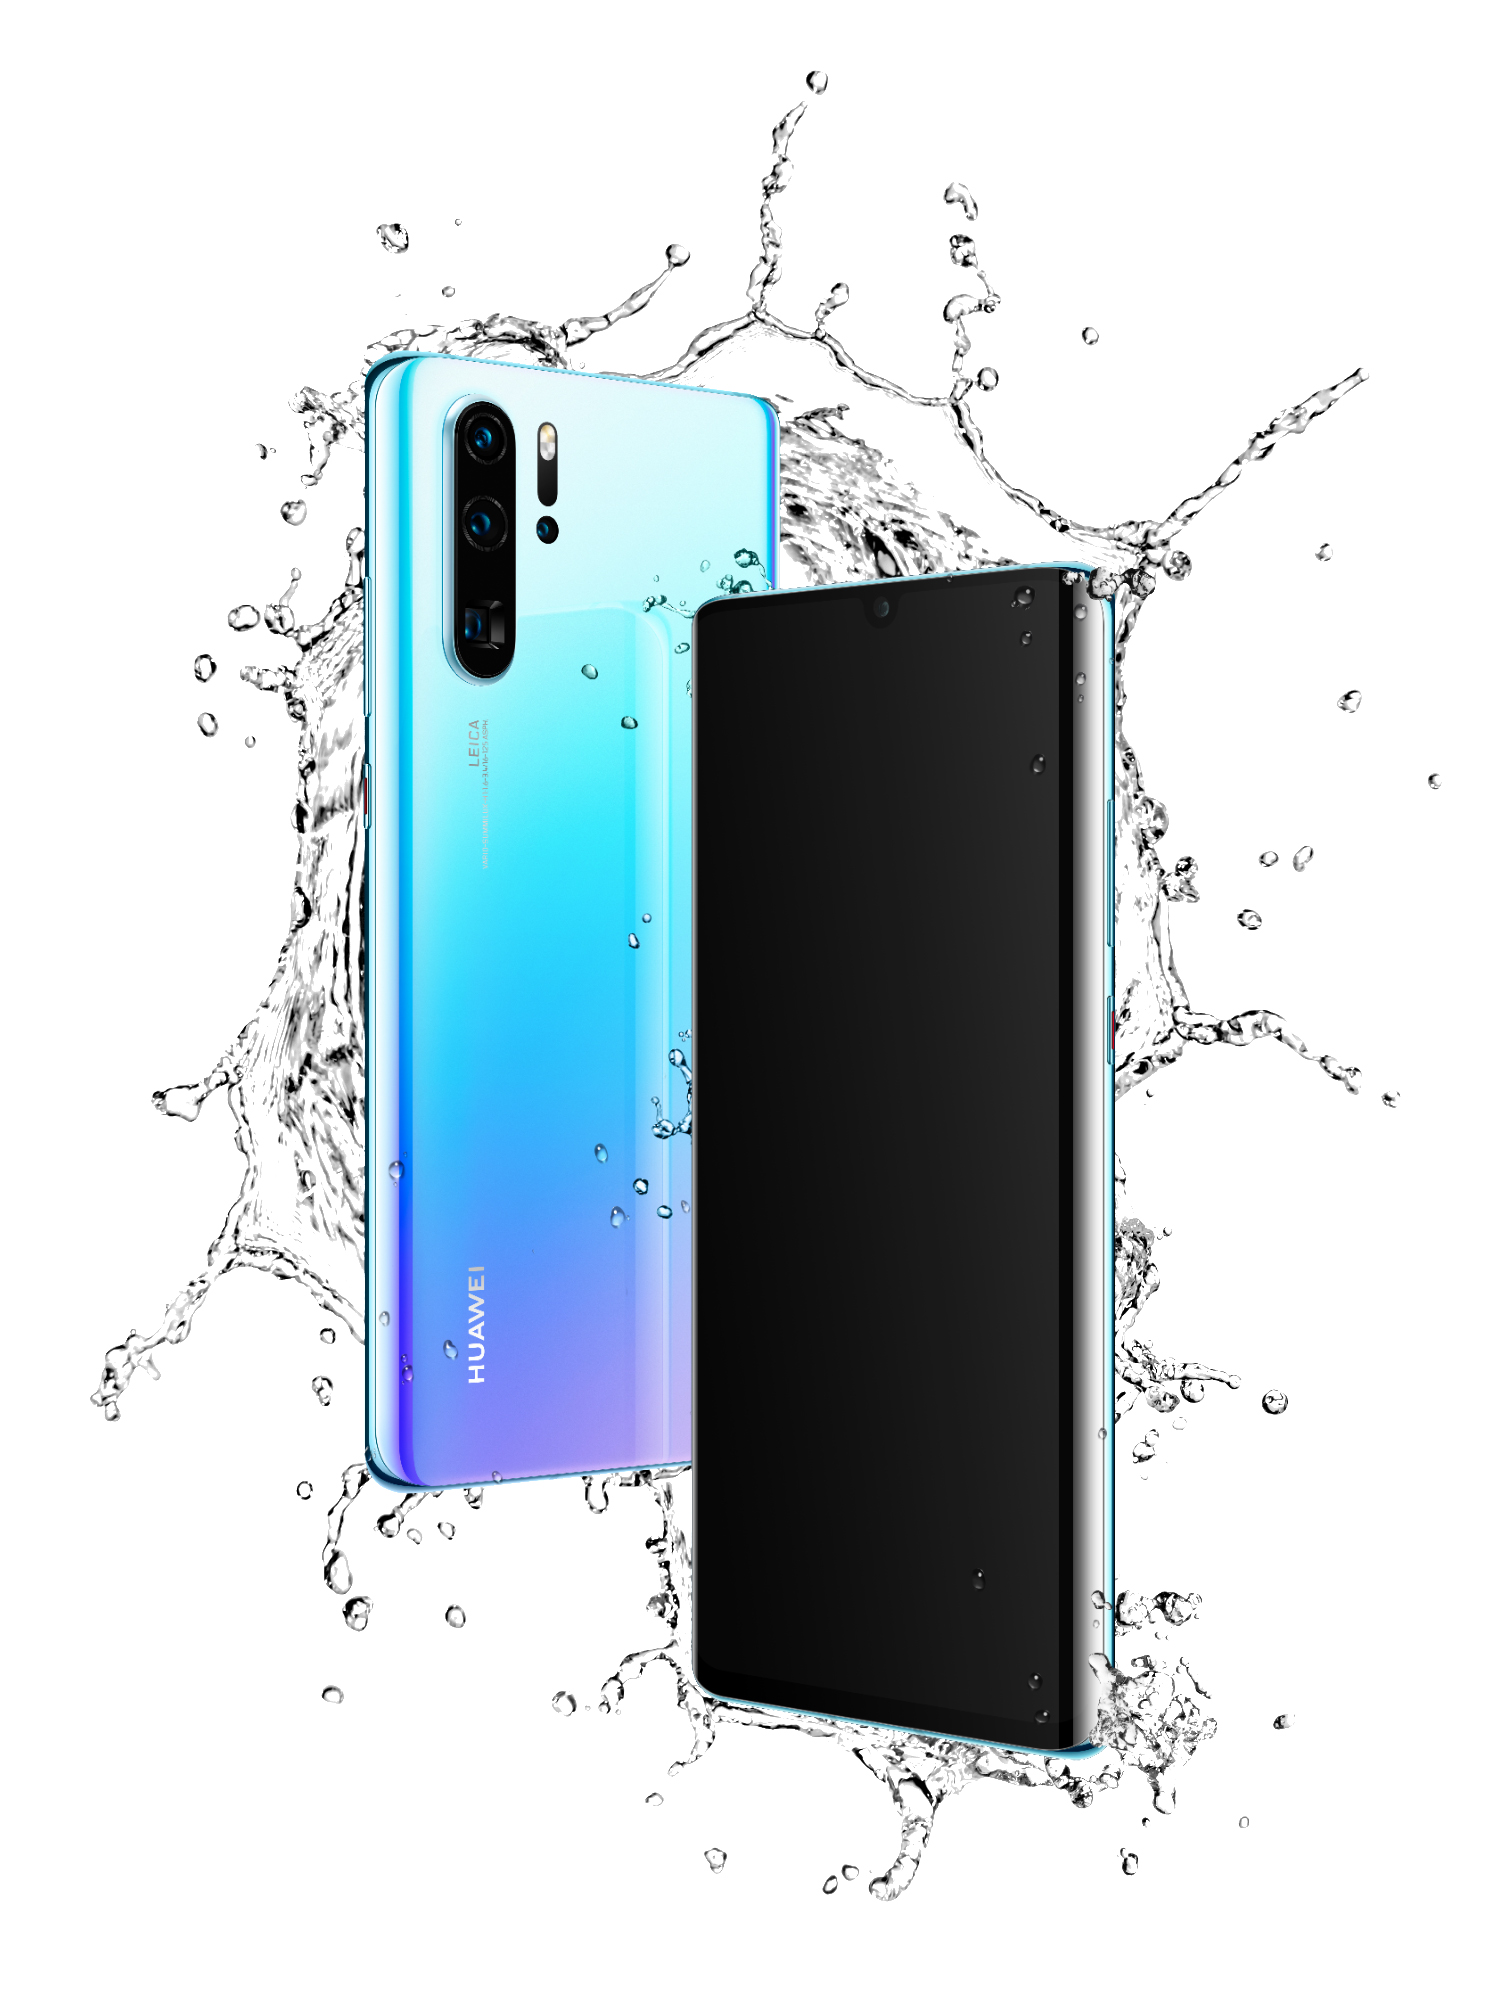 P30 Pro_The IP68 rated water